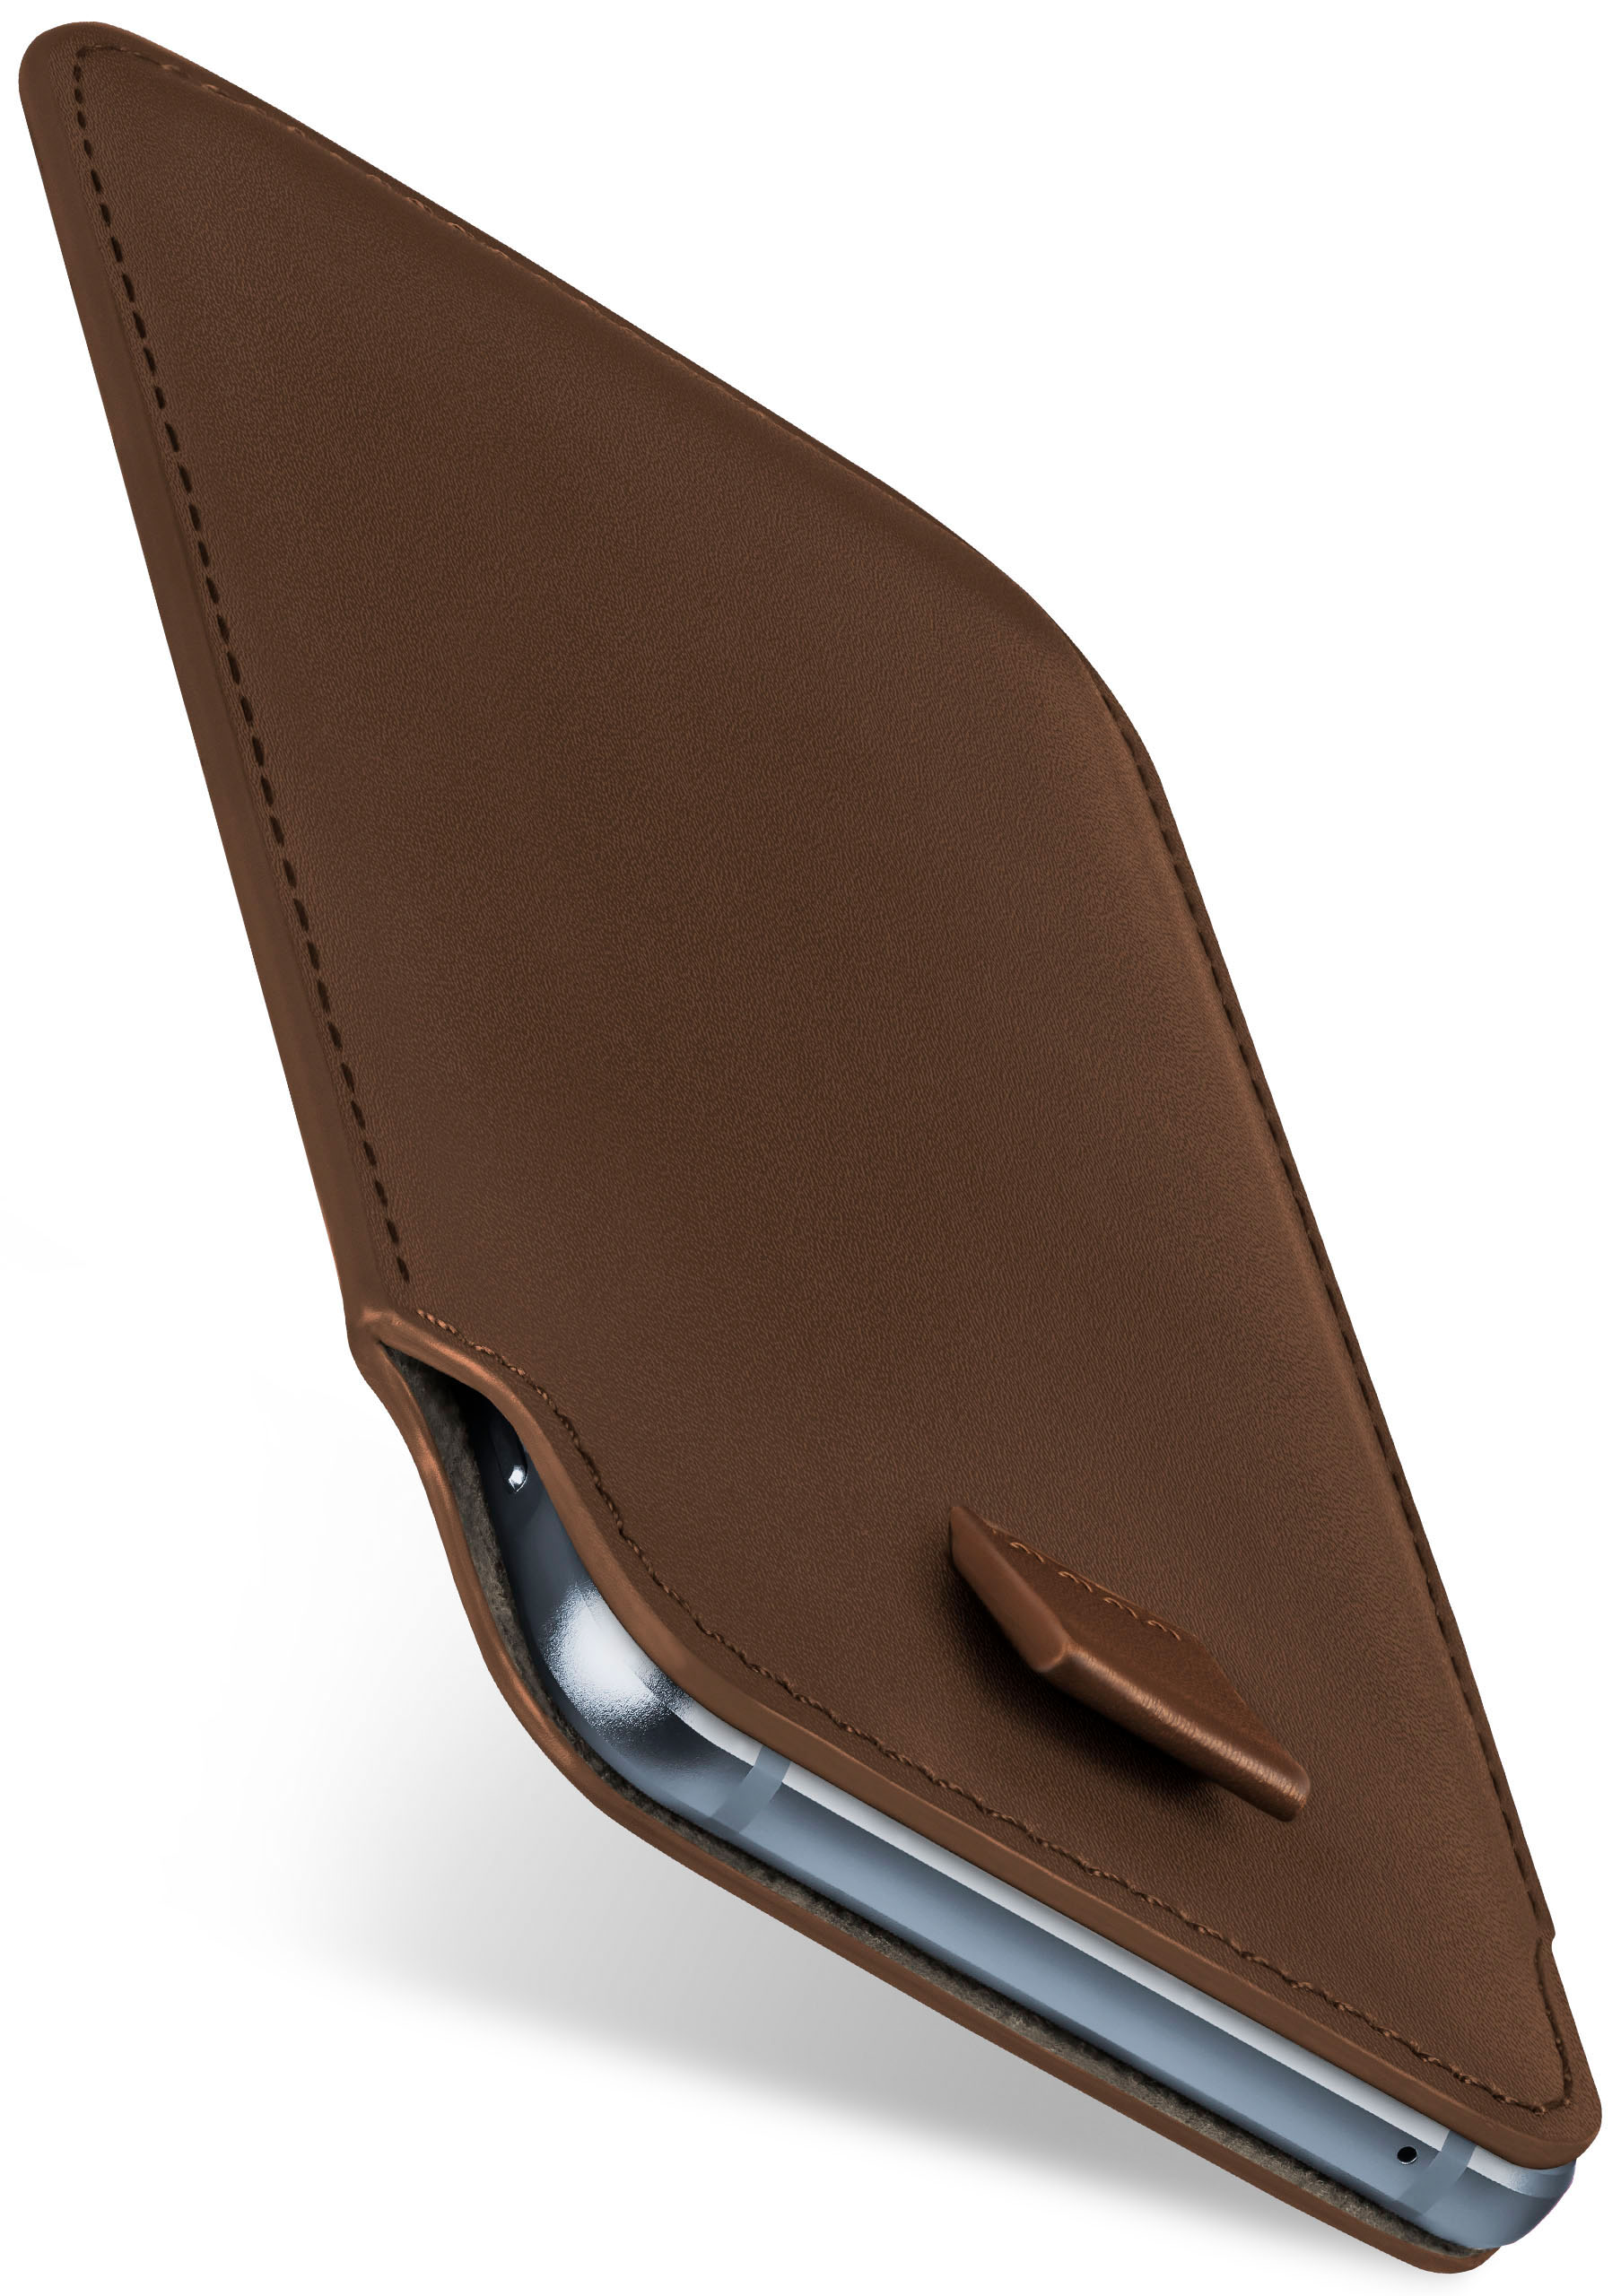 Case, Xperia Ericsson S, Full Arc Slide Sony, Oxide-Brown MOEX Cover,